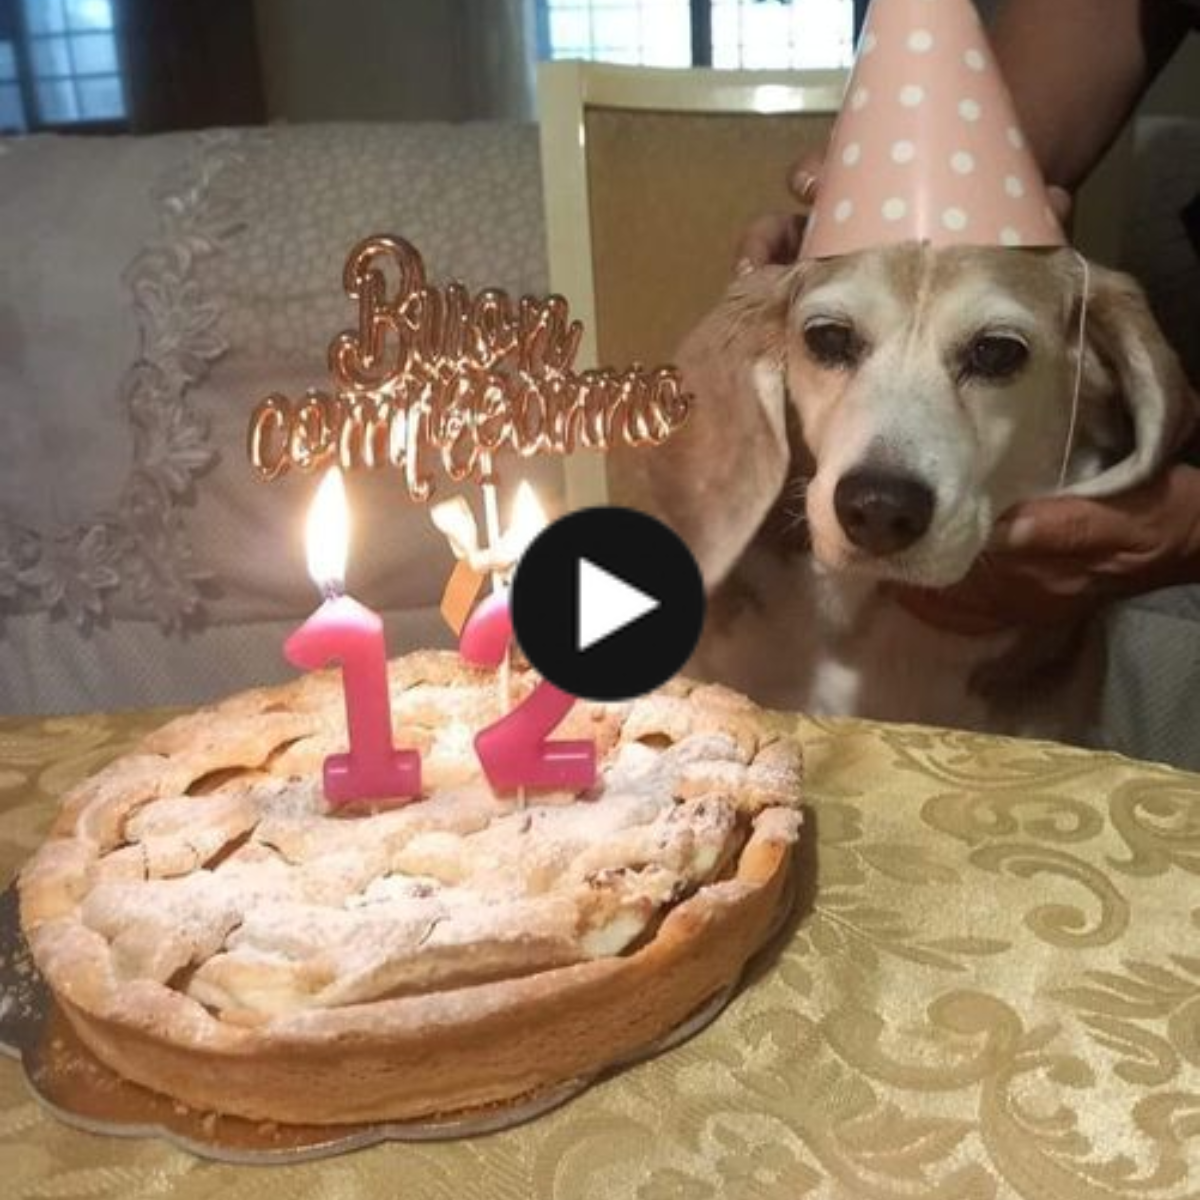 Cheers to our cherished dog’s 12th birthday!